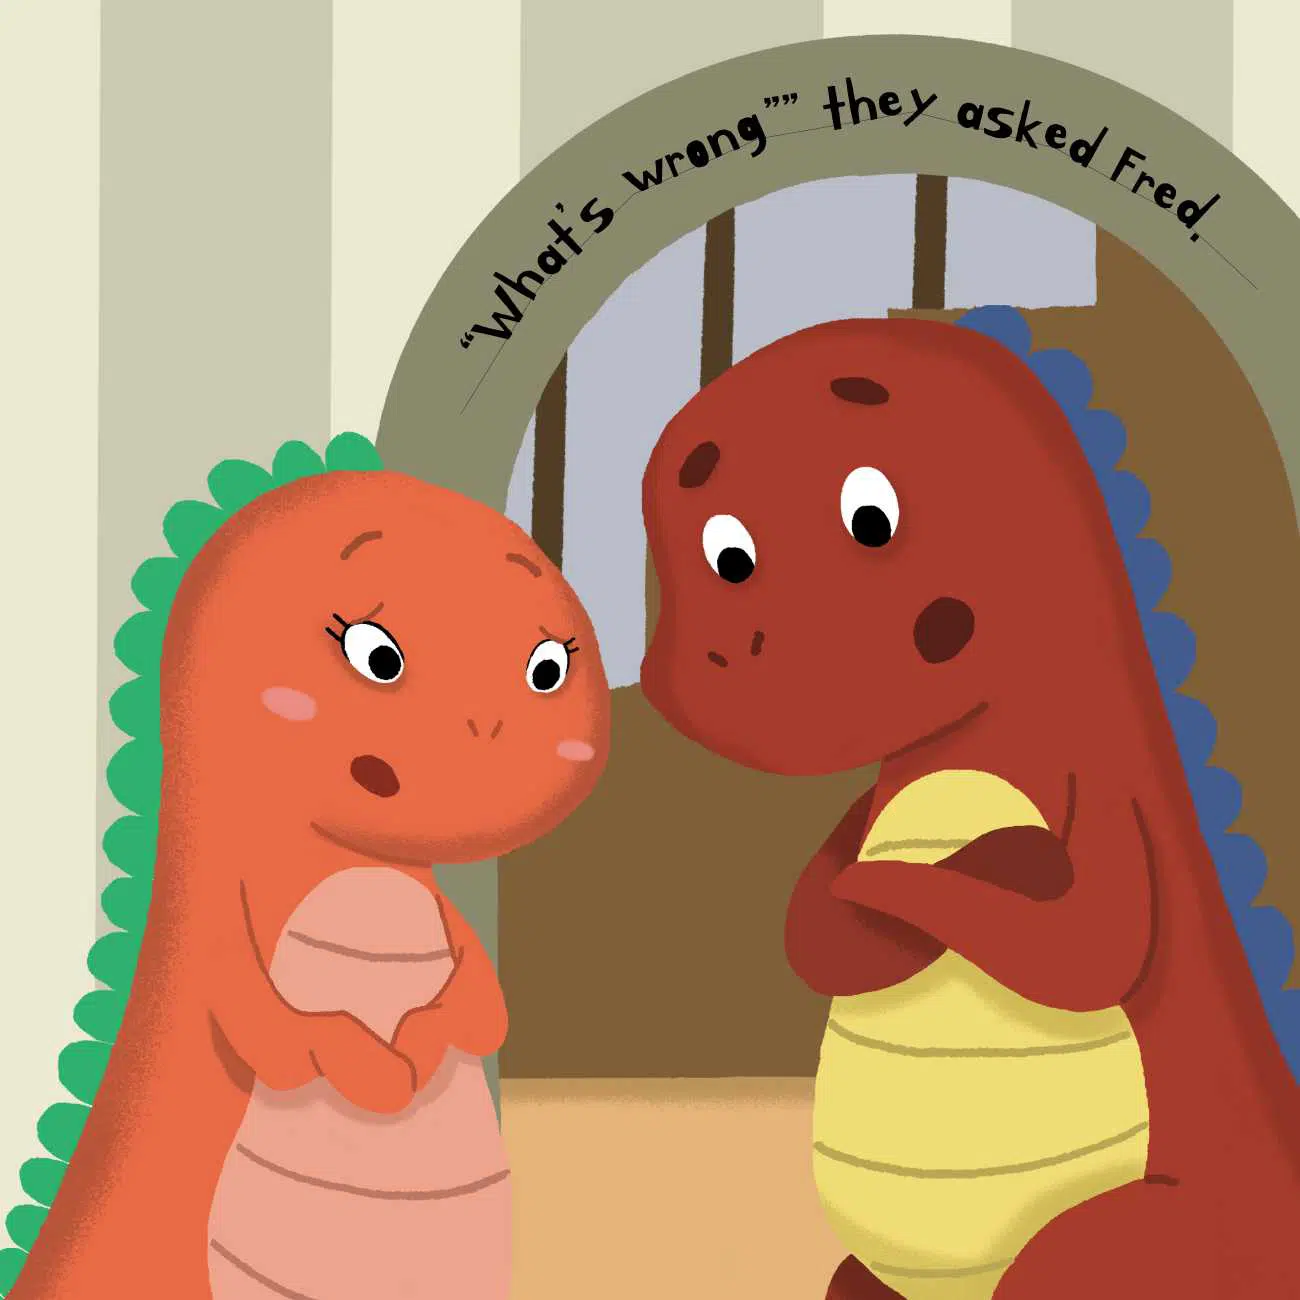 Bedtime stories Very Angry Little Dinosaur short stories for kids page 7